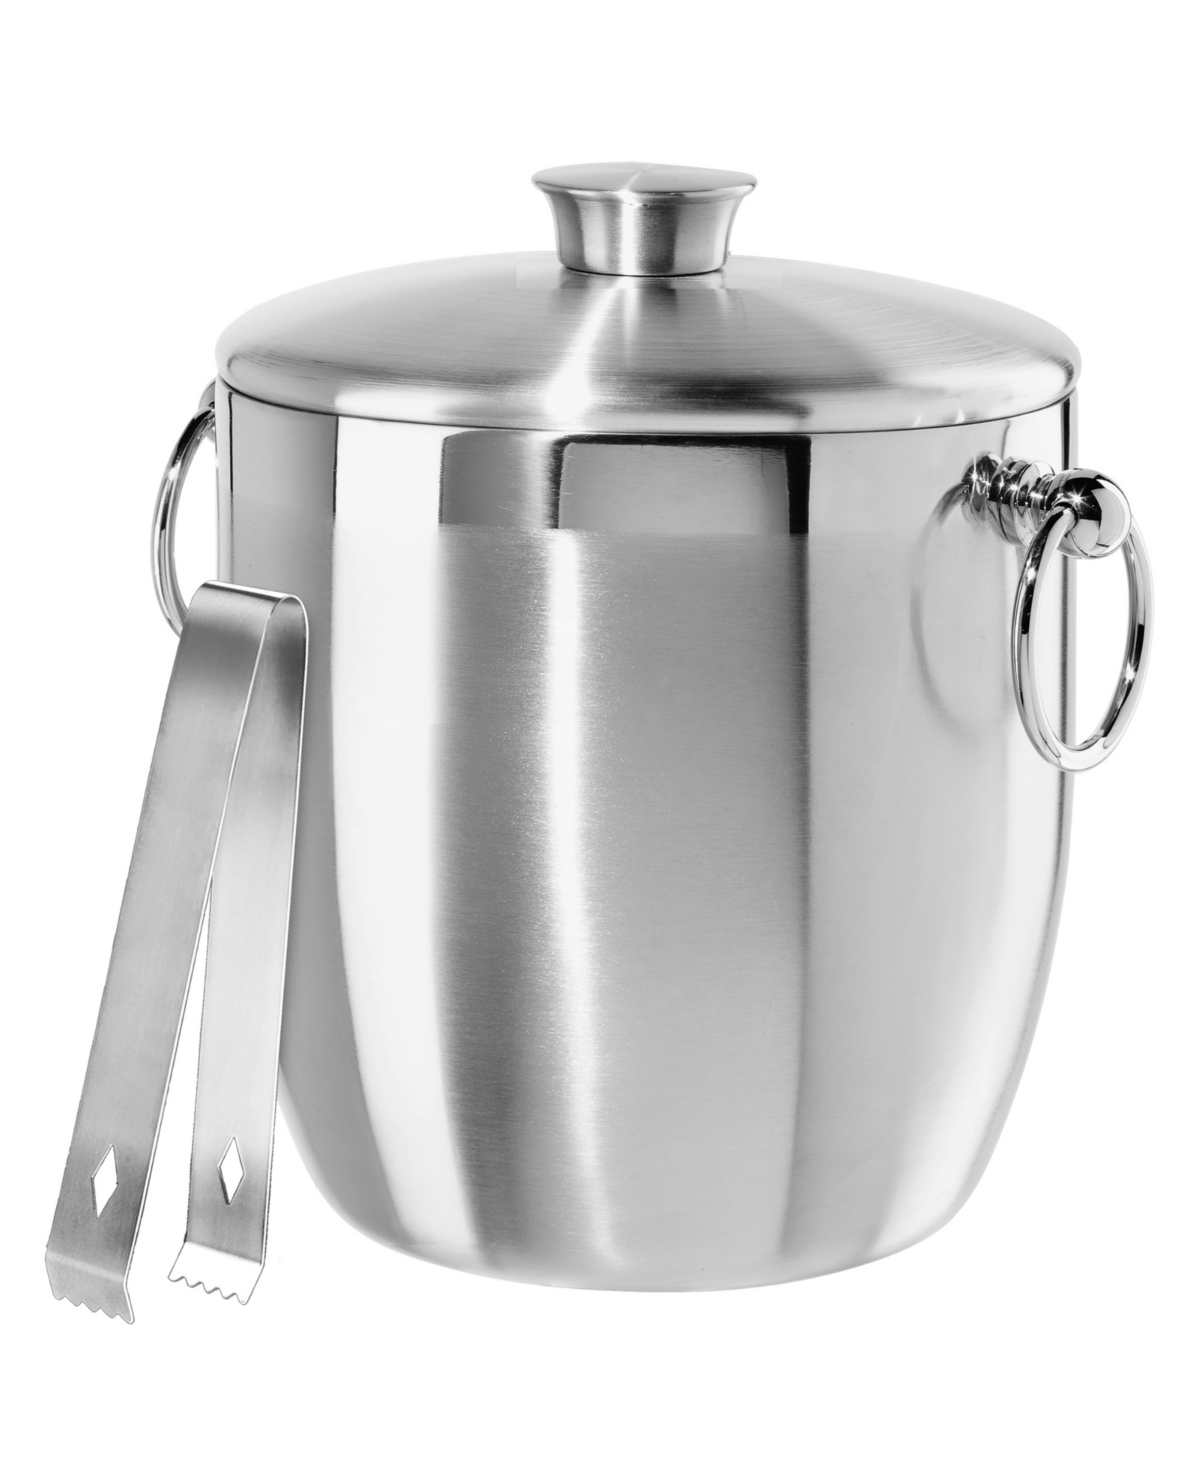 Oggi 2.8 Litre Ice Bucket With Tongs Set In Stainless Steel